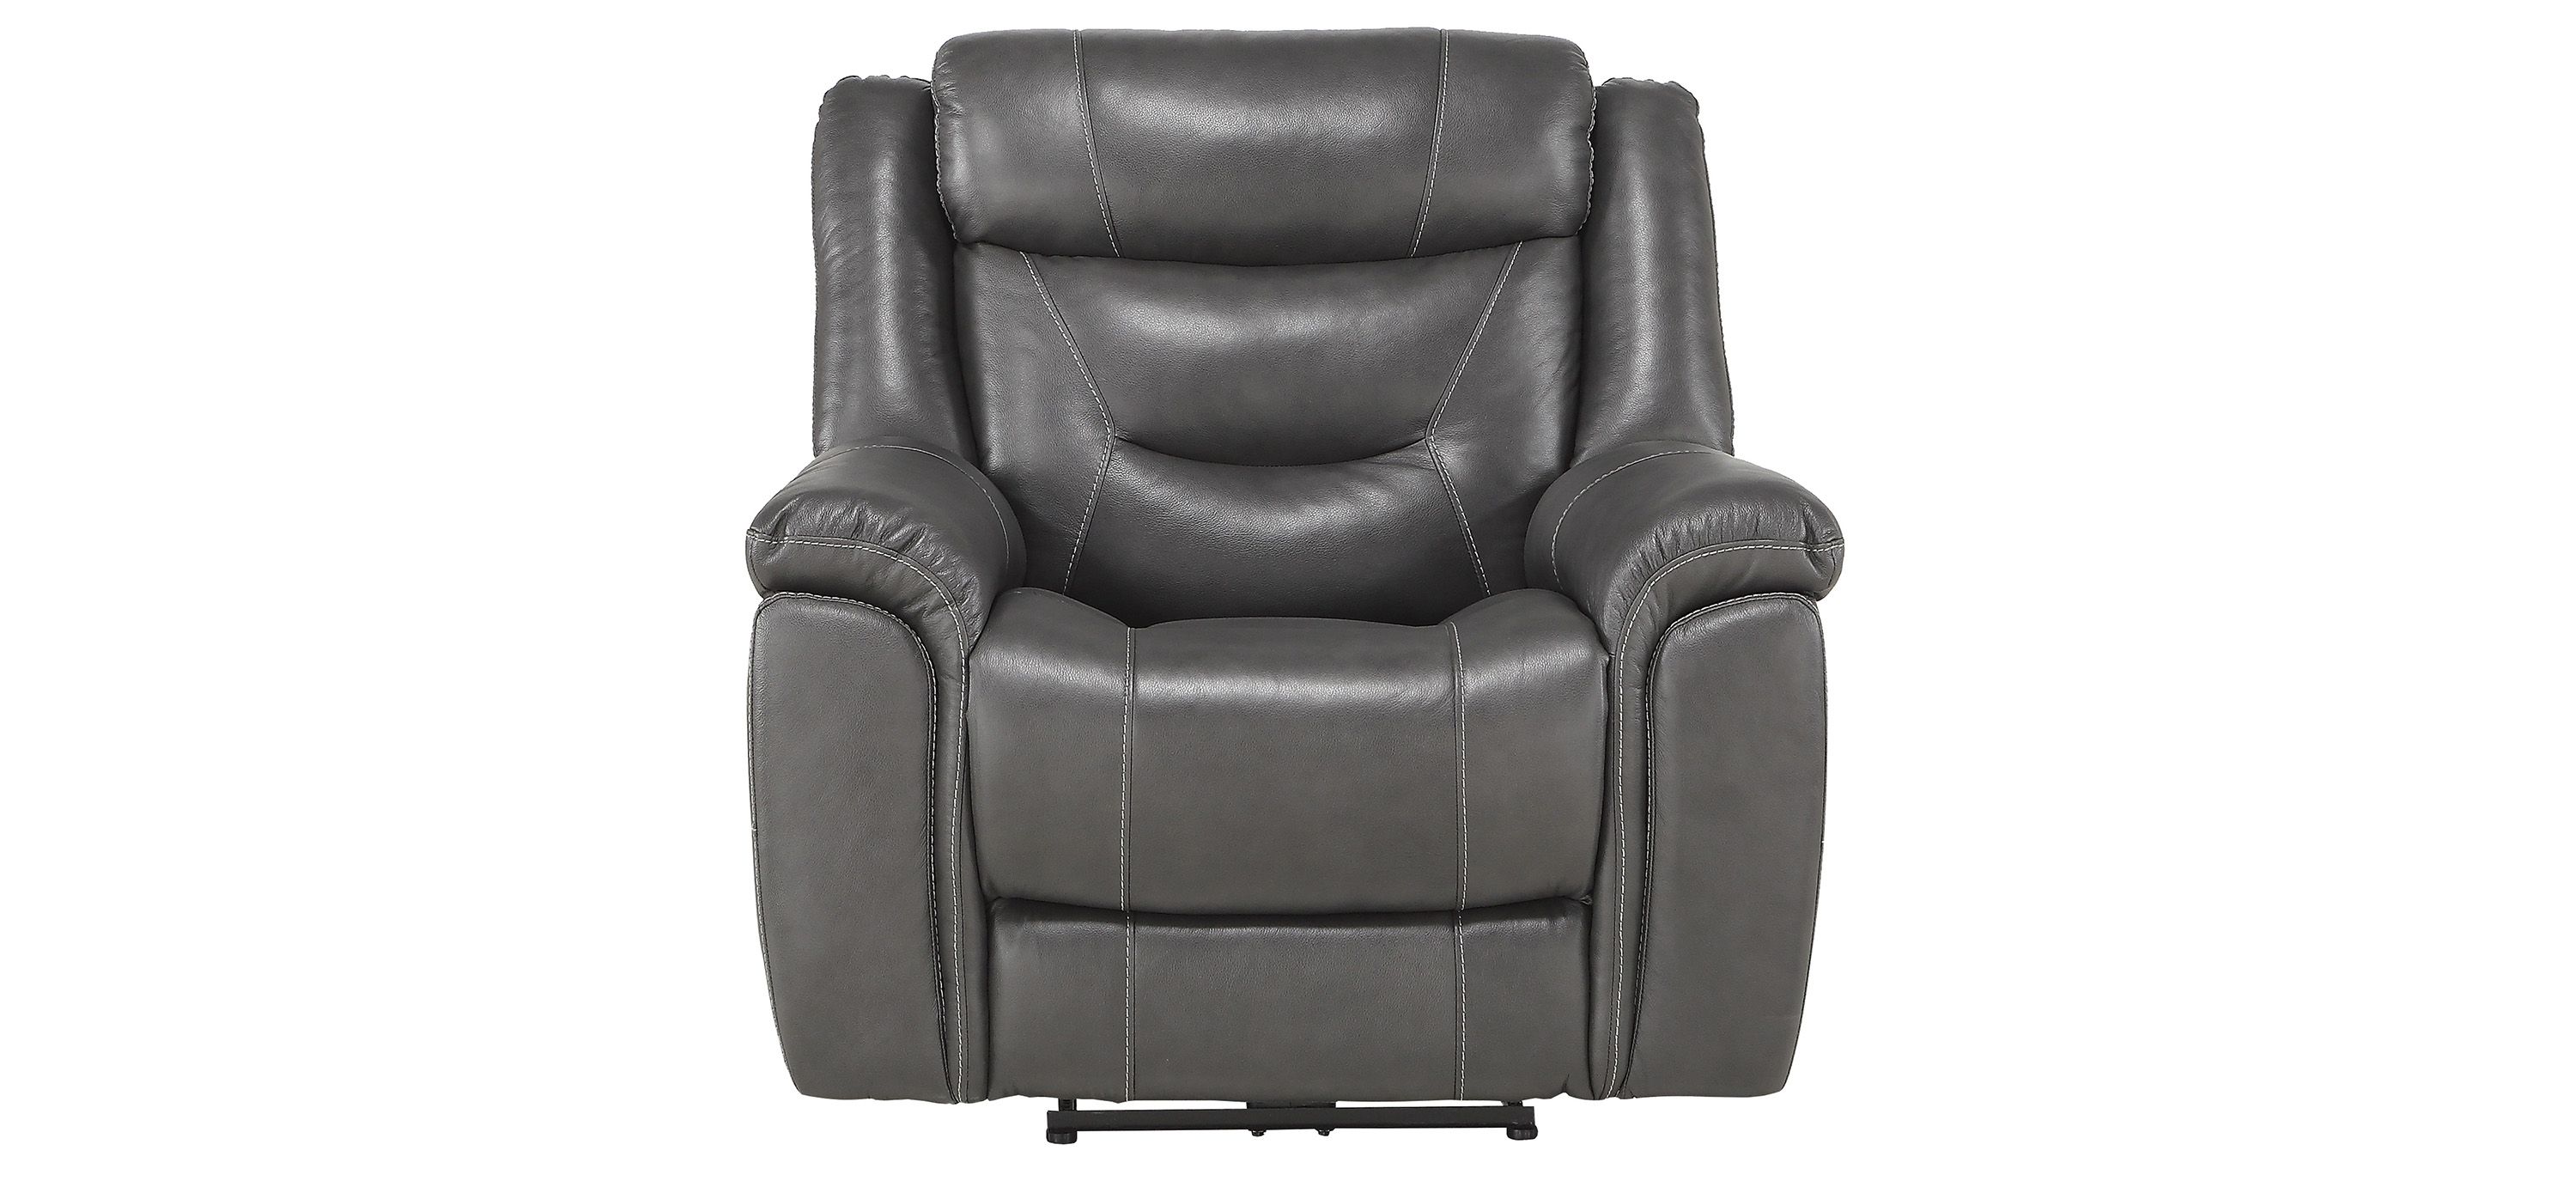 Northside Leather Power Recliner